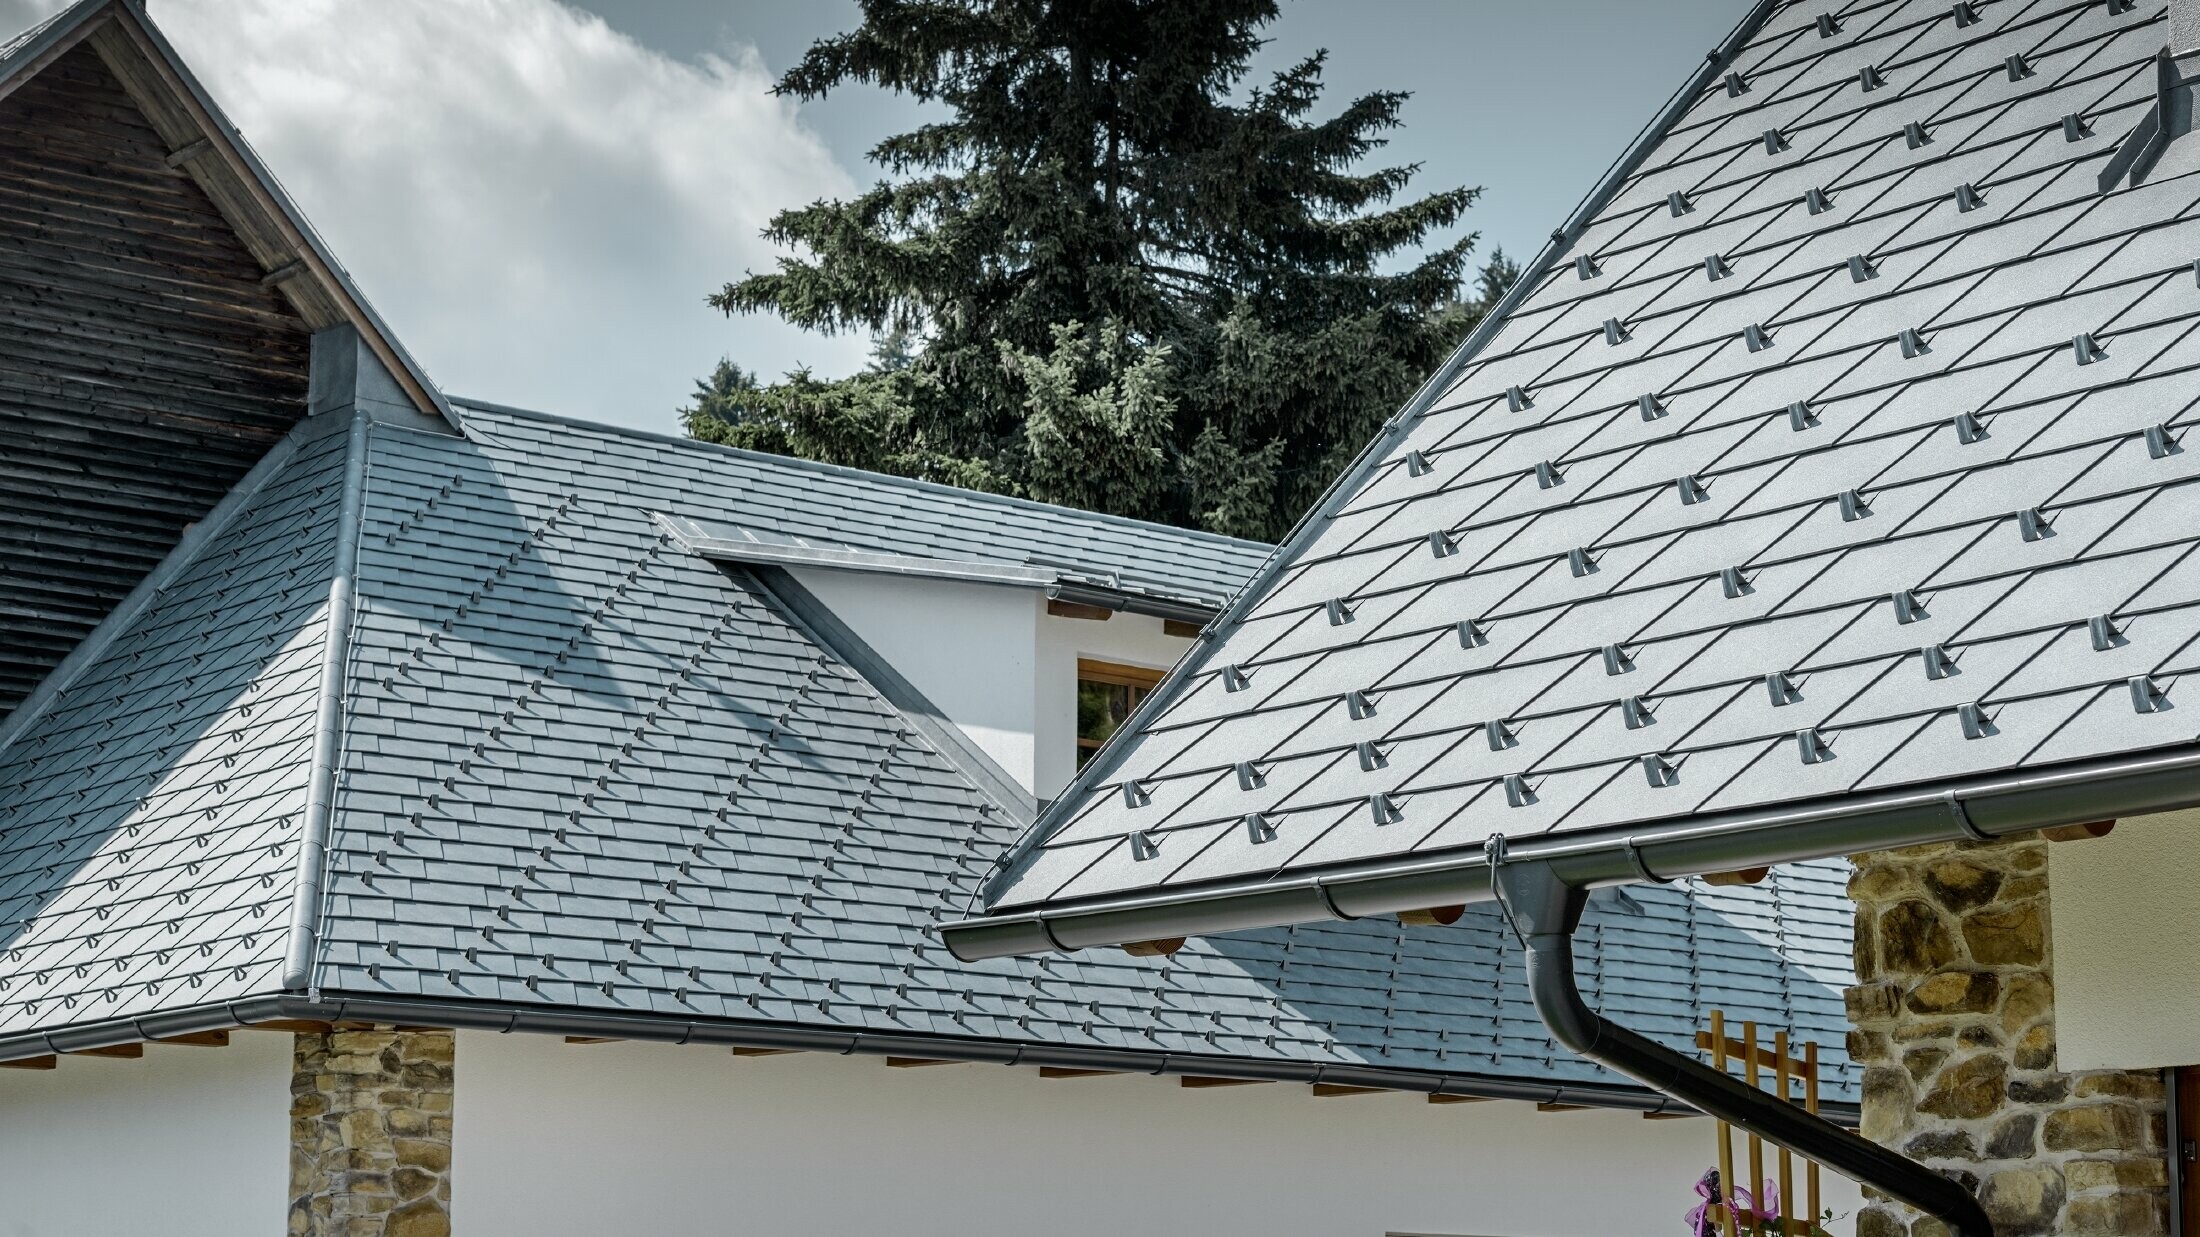 Close up of a PREFA aluminium roof cover; roof shingles in stone grey with the PREFA aluminium gutter in anthracite; an eyebrow dormer with standing seam roof can be seen in the background. The façade is white with integrated stone elements.